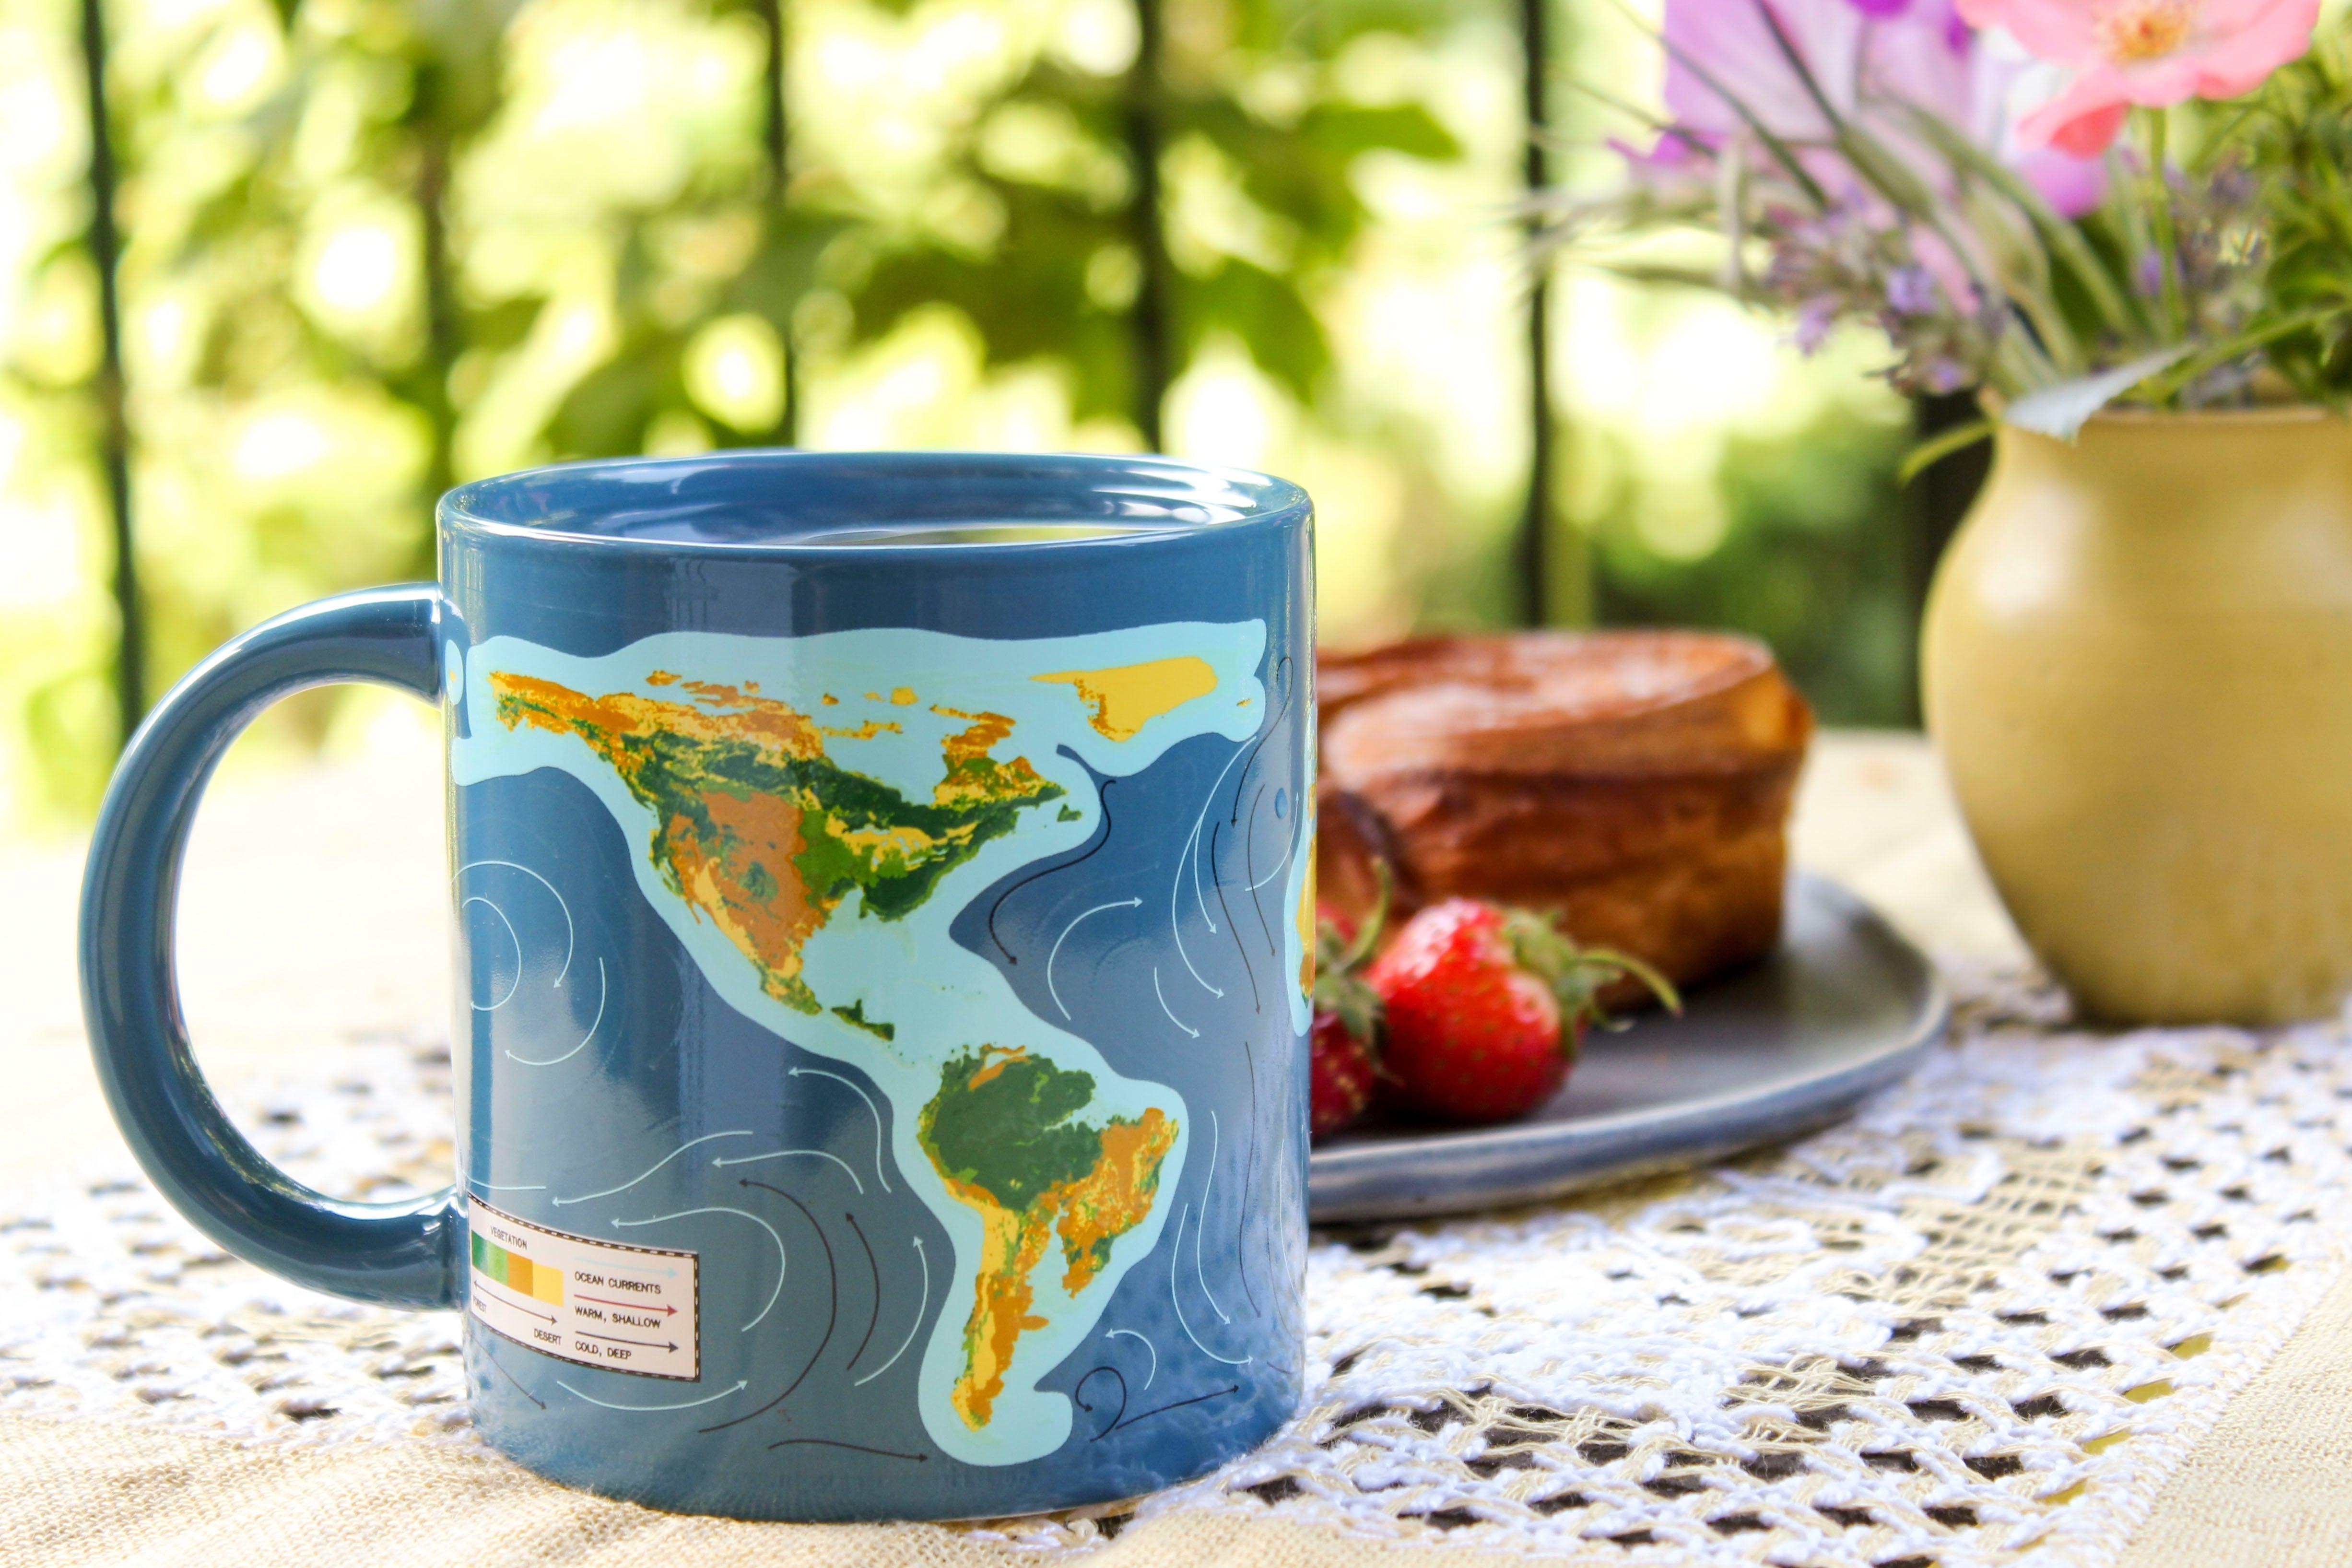 Product photo of Climate Change Heat-Changing Mug, a novelty gift manufactured by The Unemployed Philosophers Guild.